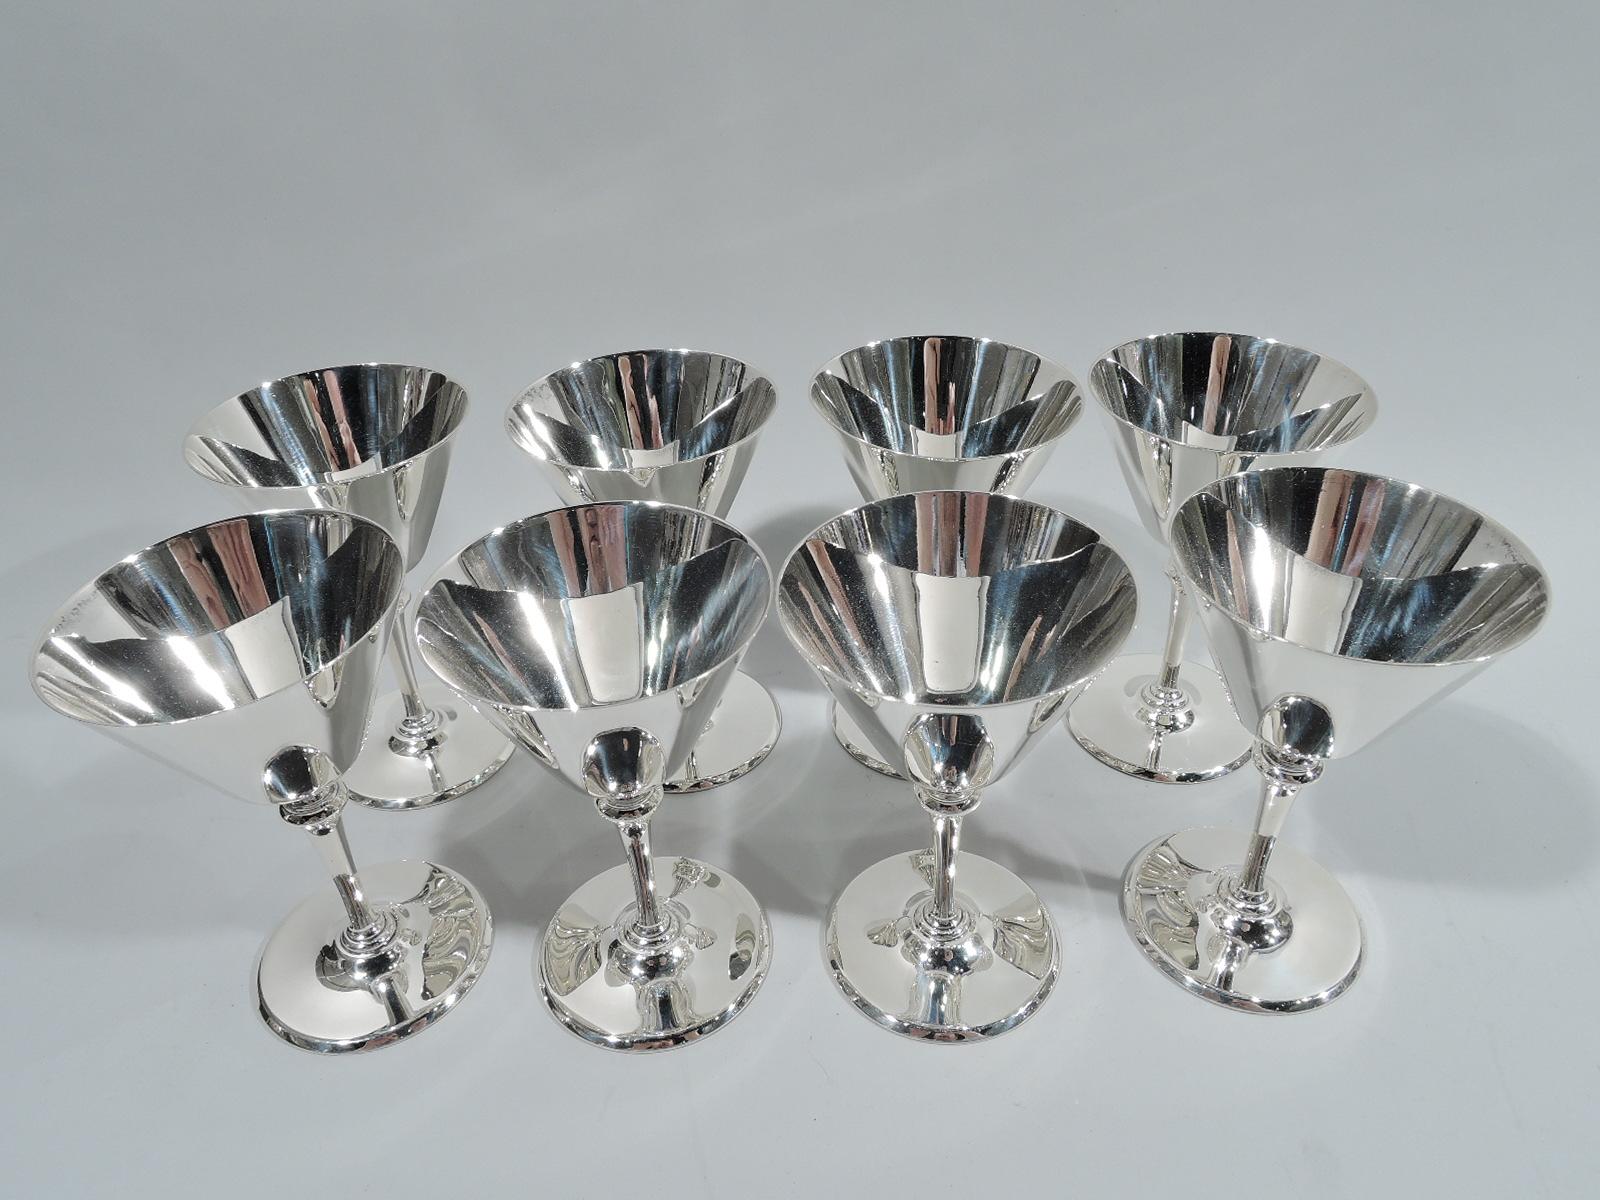 Set of 8 Fabulous Art Deco sterling silver cocktail cups. Made by Tiffany & Co. in New York, ca 1922. Each: Conical bowl on tapering stem on raised round foot. Fully marked including pattern no. 20037 (first produced in 1922) and director’s letter